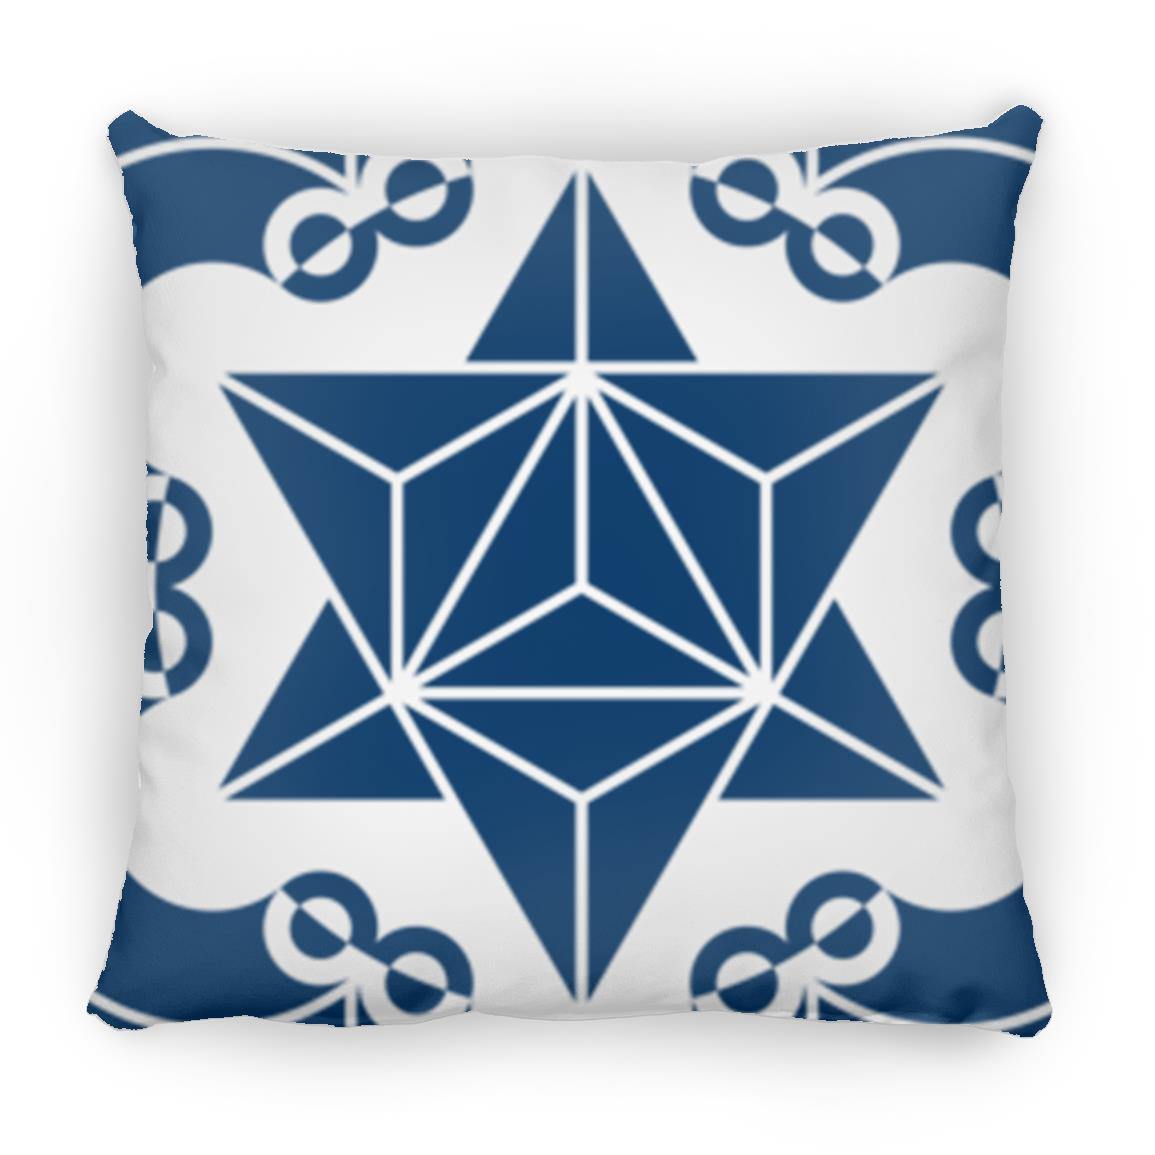 Crop Circle Pillow - Cley Hill 2 - Shapes of Wisdom